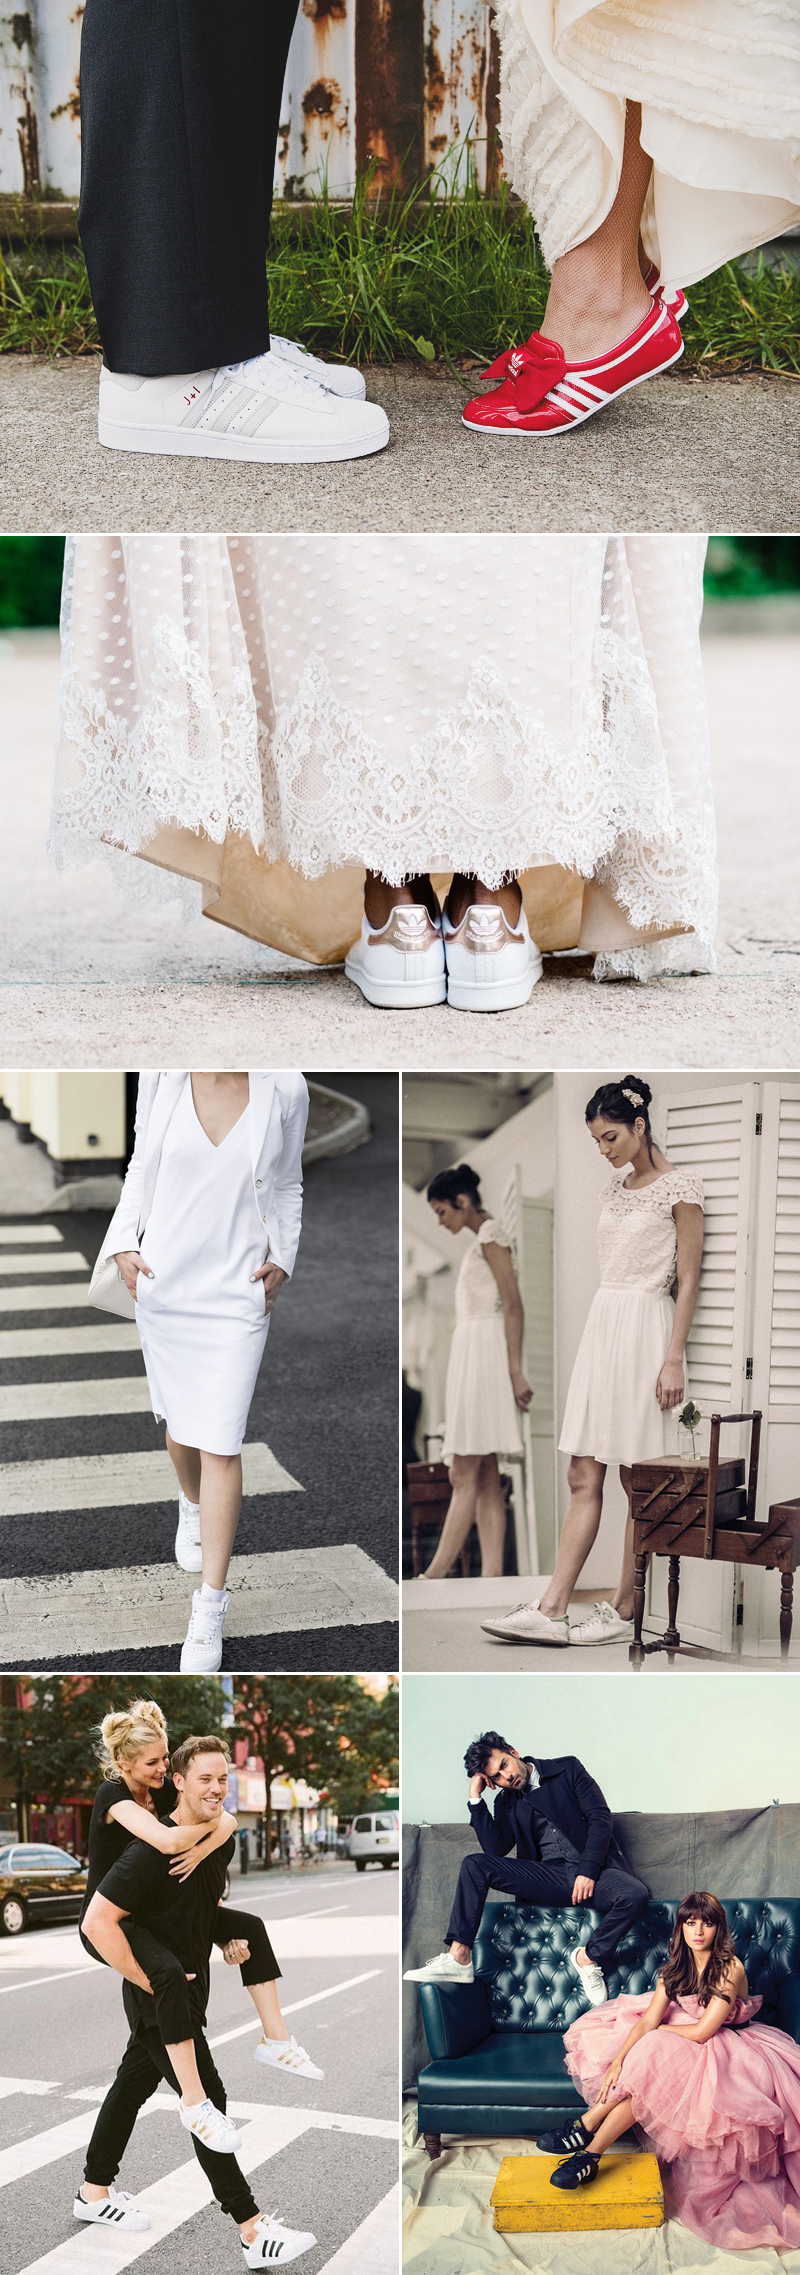 short wedding dress with sneakers